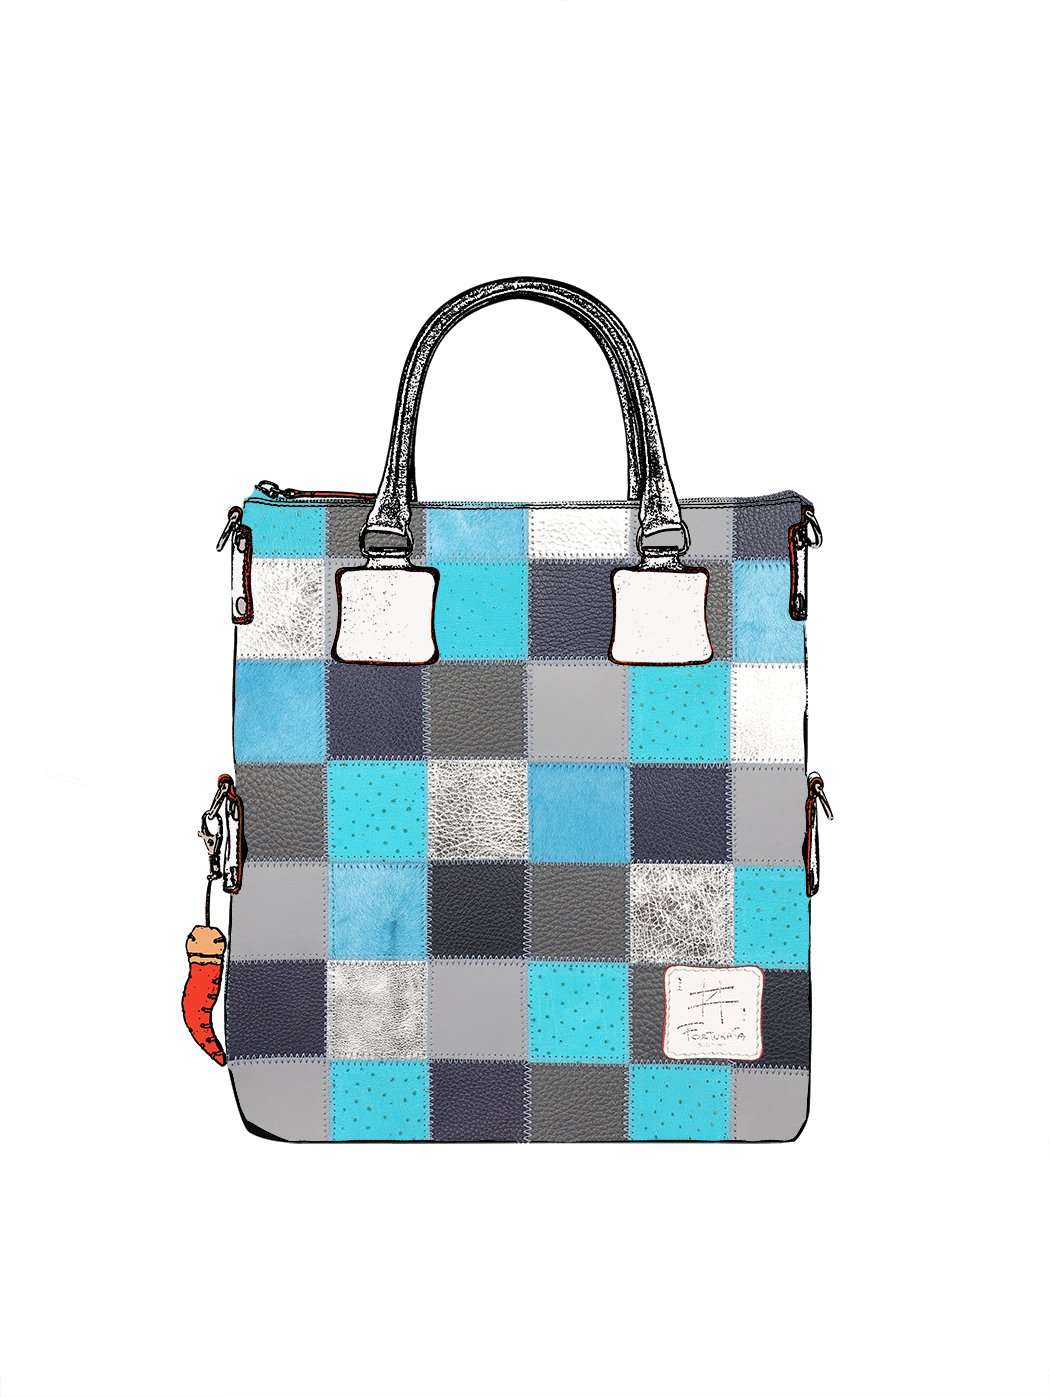 Large Tote Convertible Bag Light Blue - Fortunata Patchwork